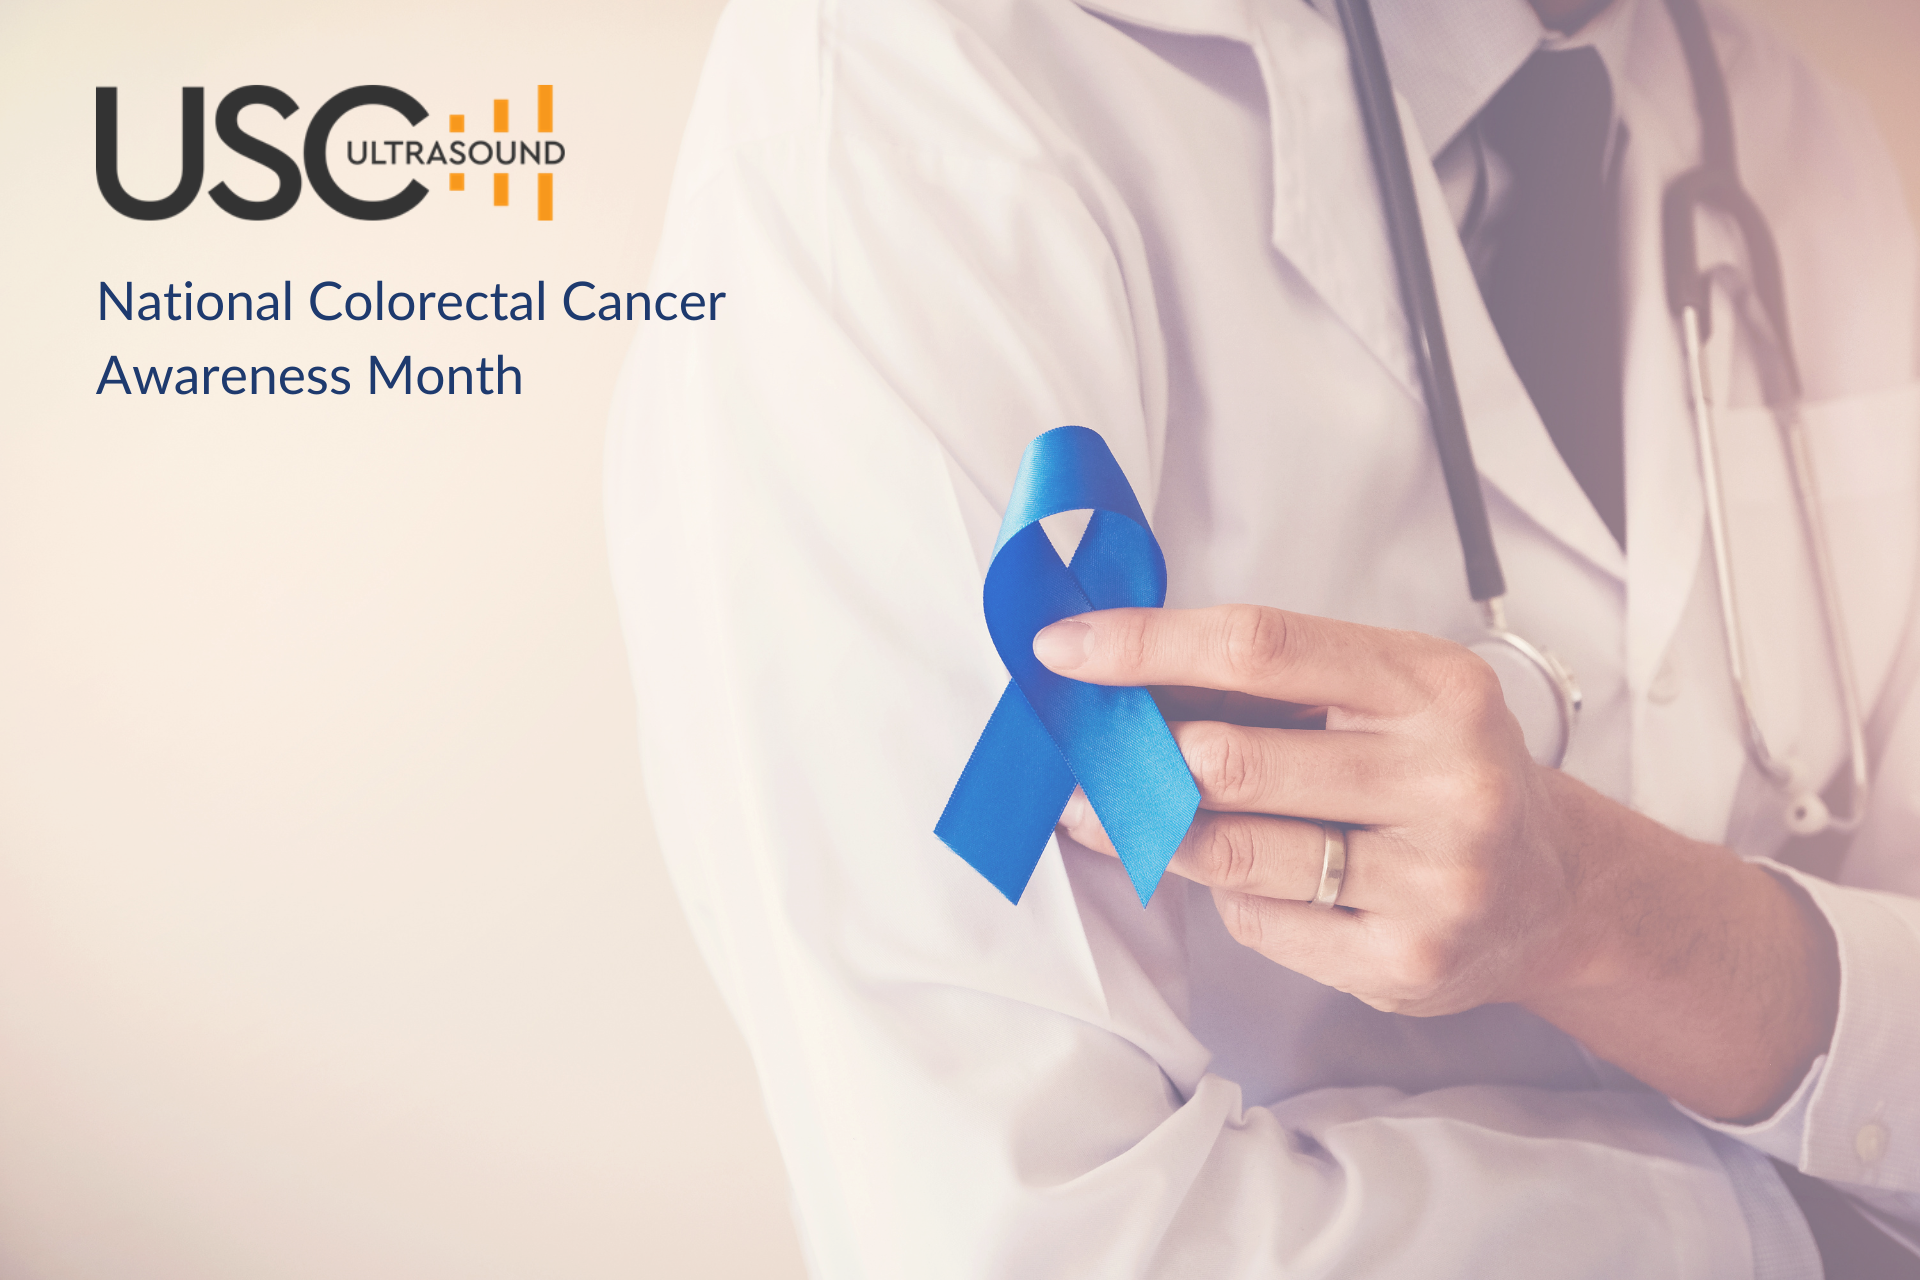 Colorectal Cancer Awareness and Prevention